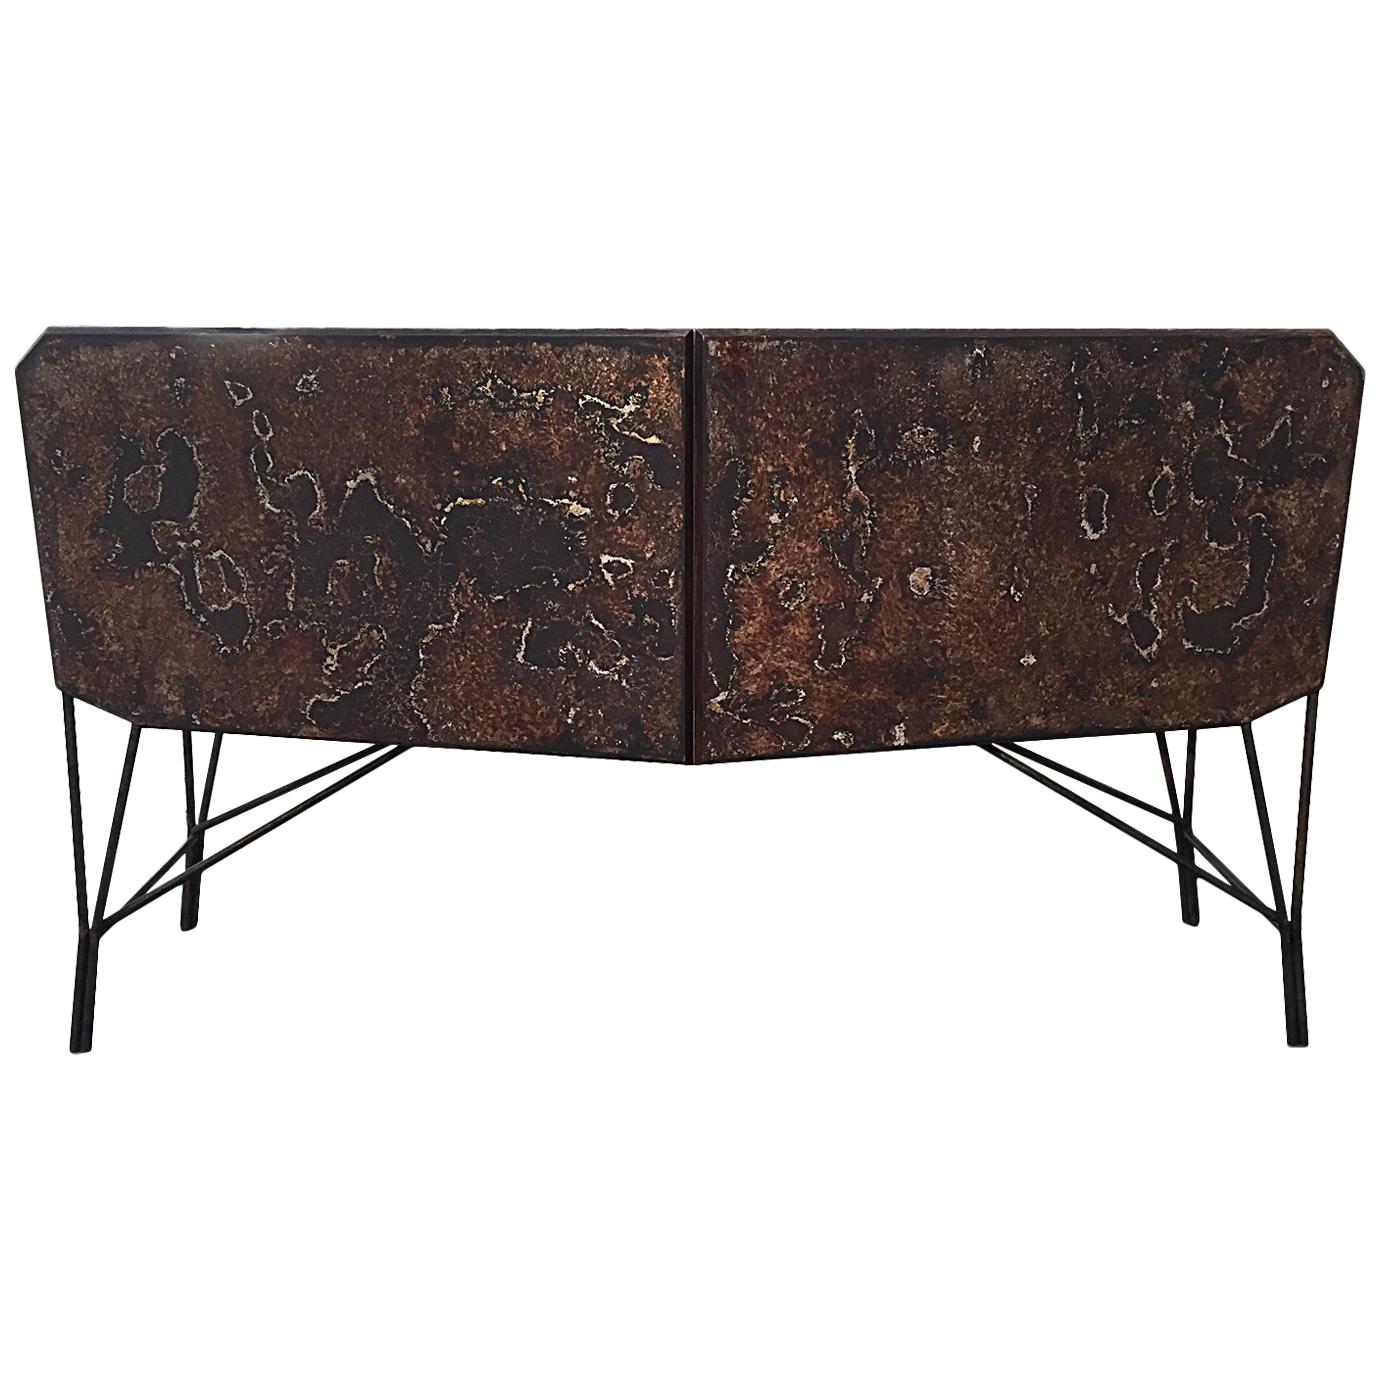 Contemporary Rusty Buffet Triarm, Silver Wood Inside, Limited Edition  im Angebot